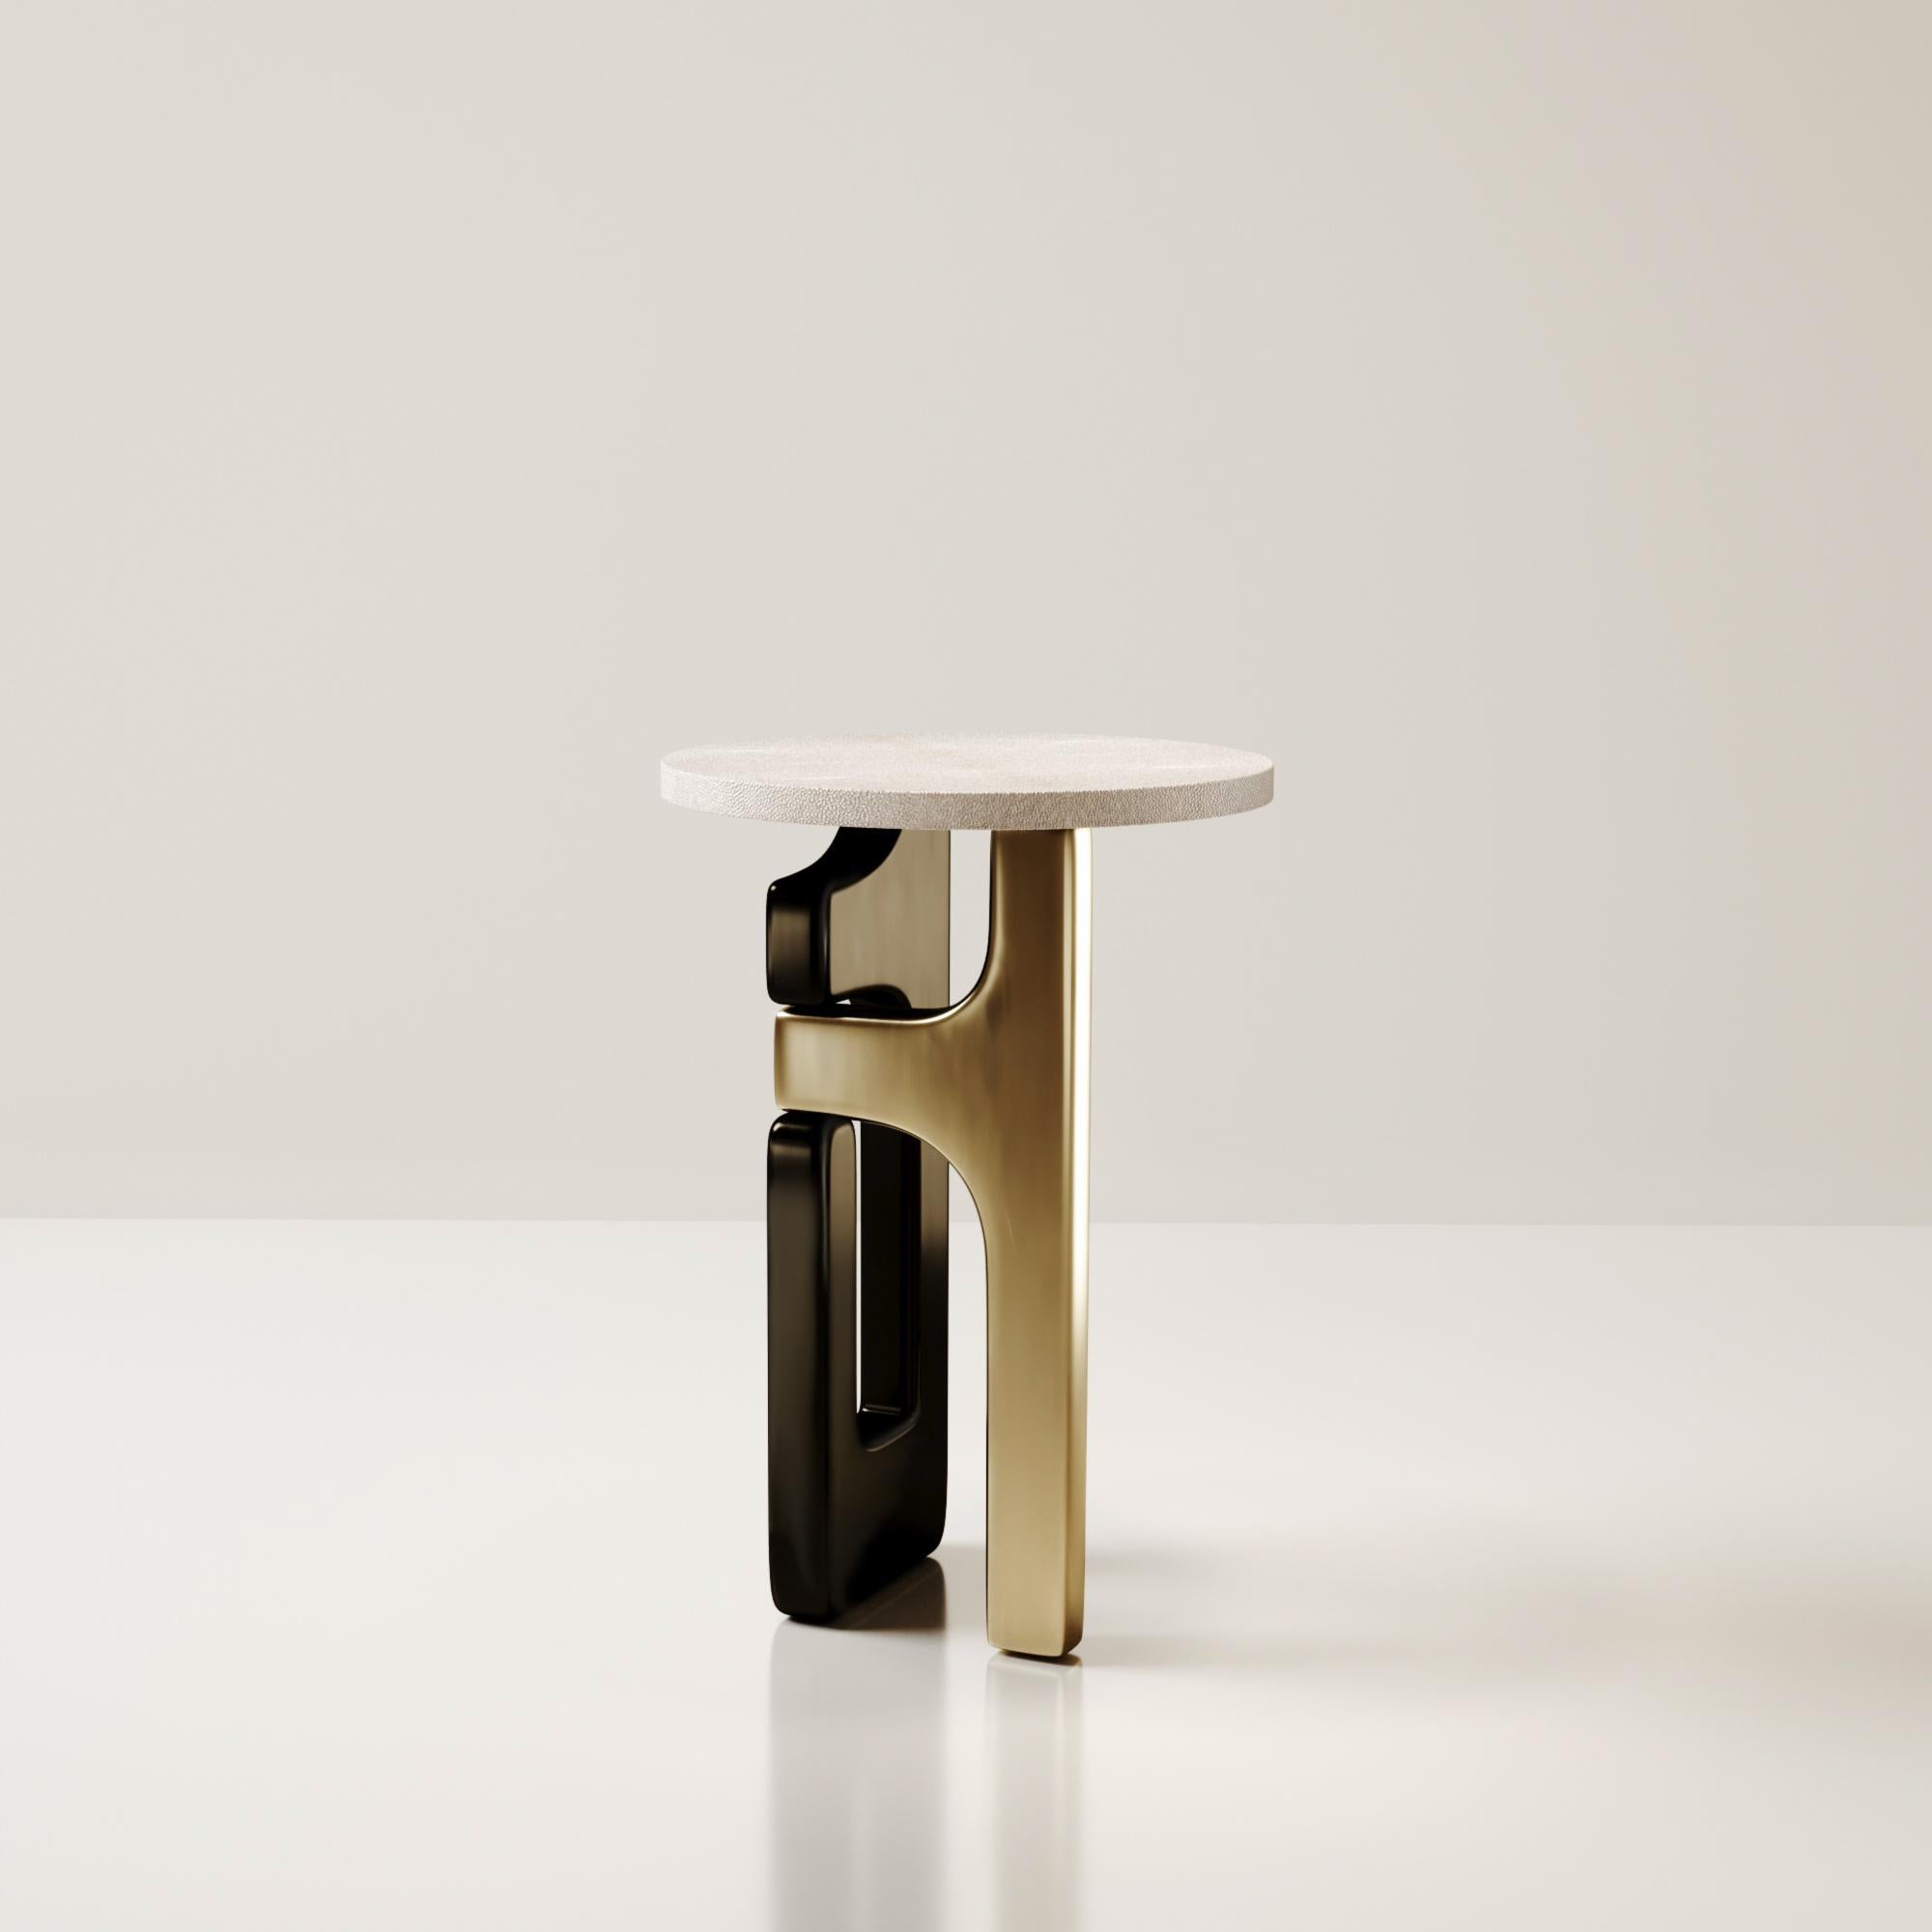 The Apoli sidee table by Kifu Paris is both dramatic and organic it’s unique design. The cream shagreen inlaid top sits on an ethereal geometric and sculptural bronze-patina brass base. This piece is designed by Kifu Augousti the daughter of Ria and